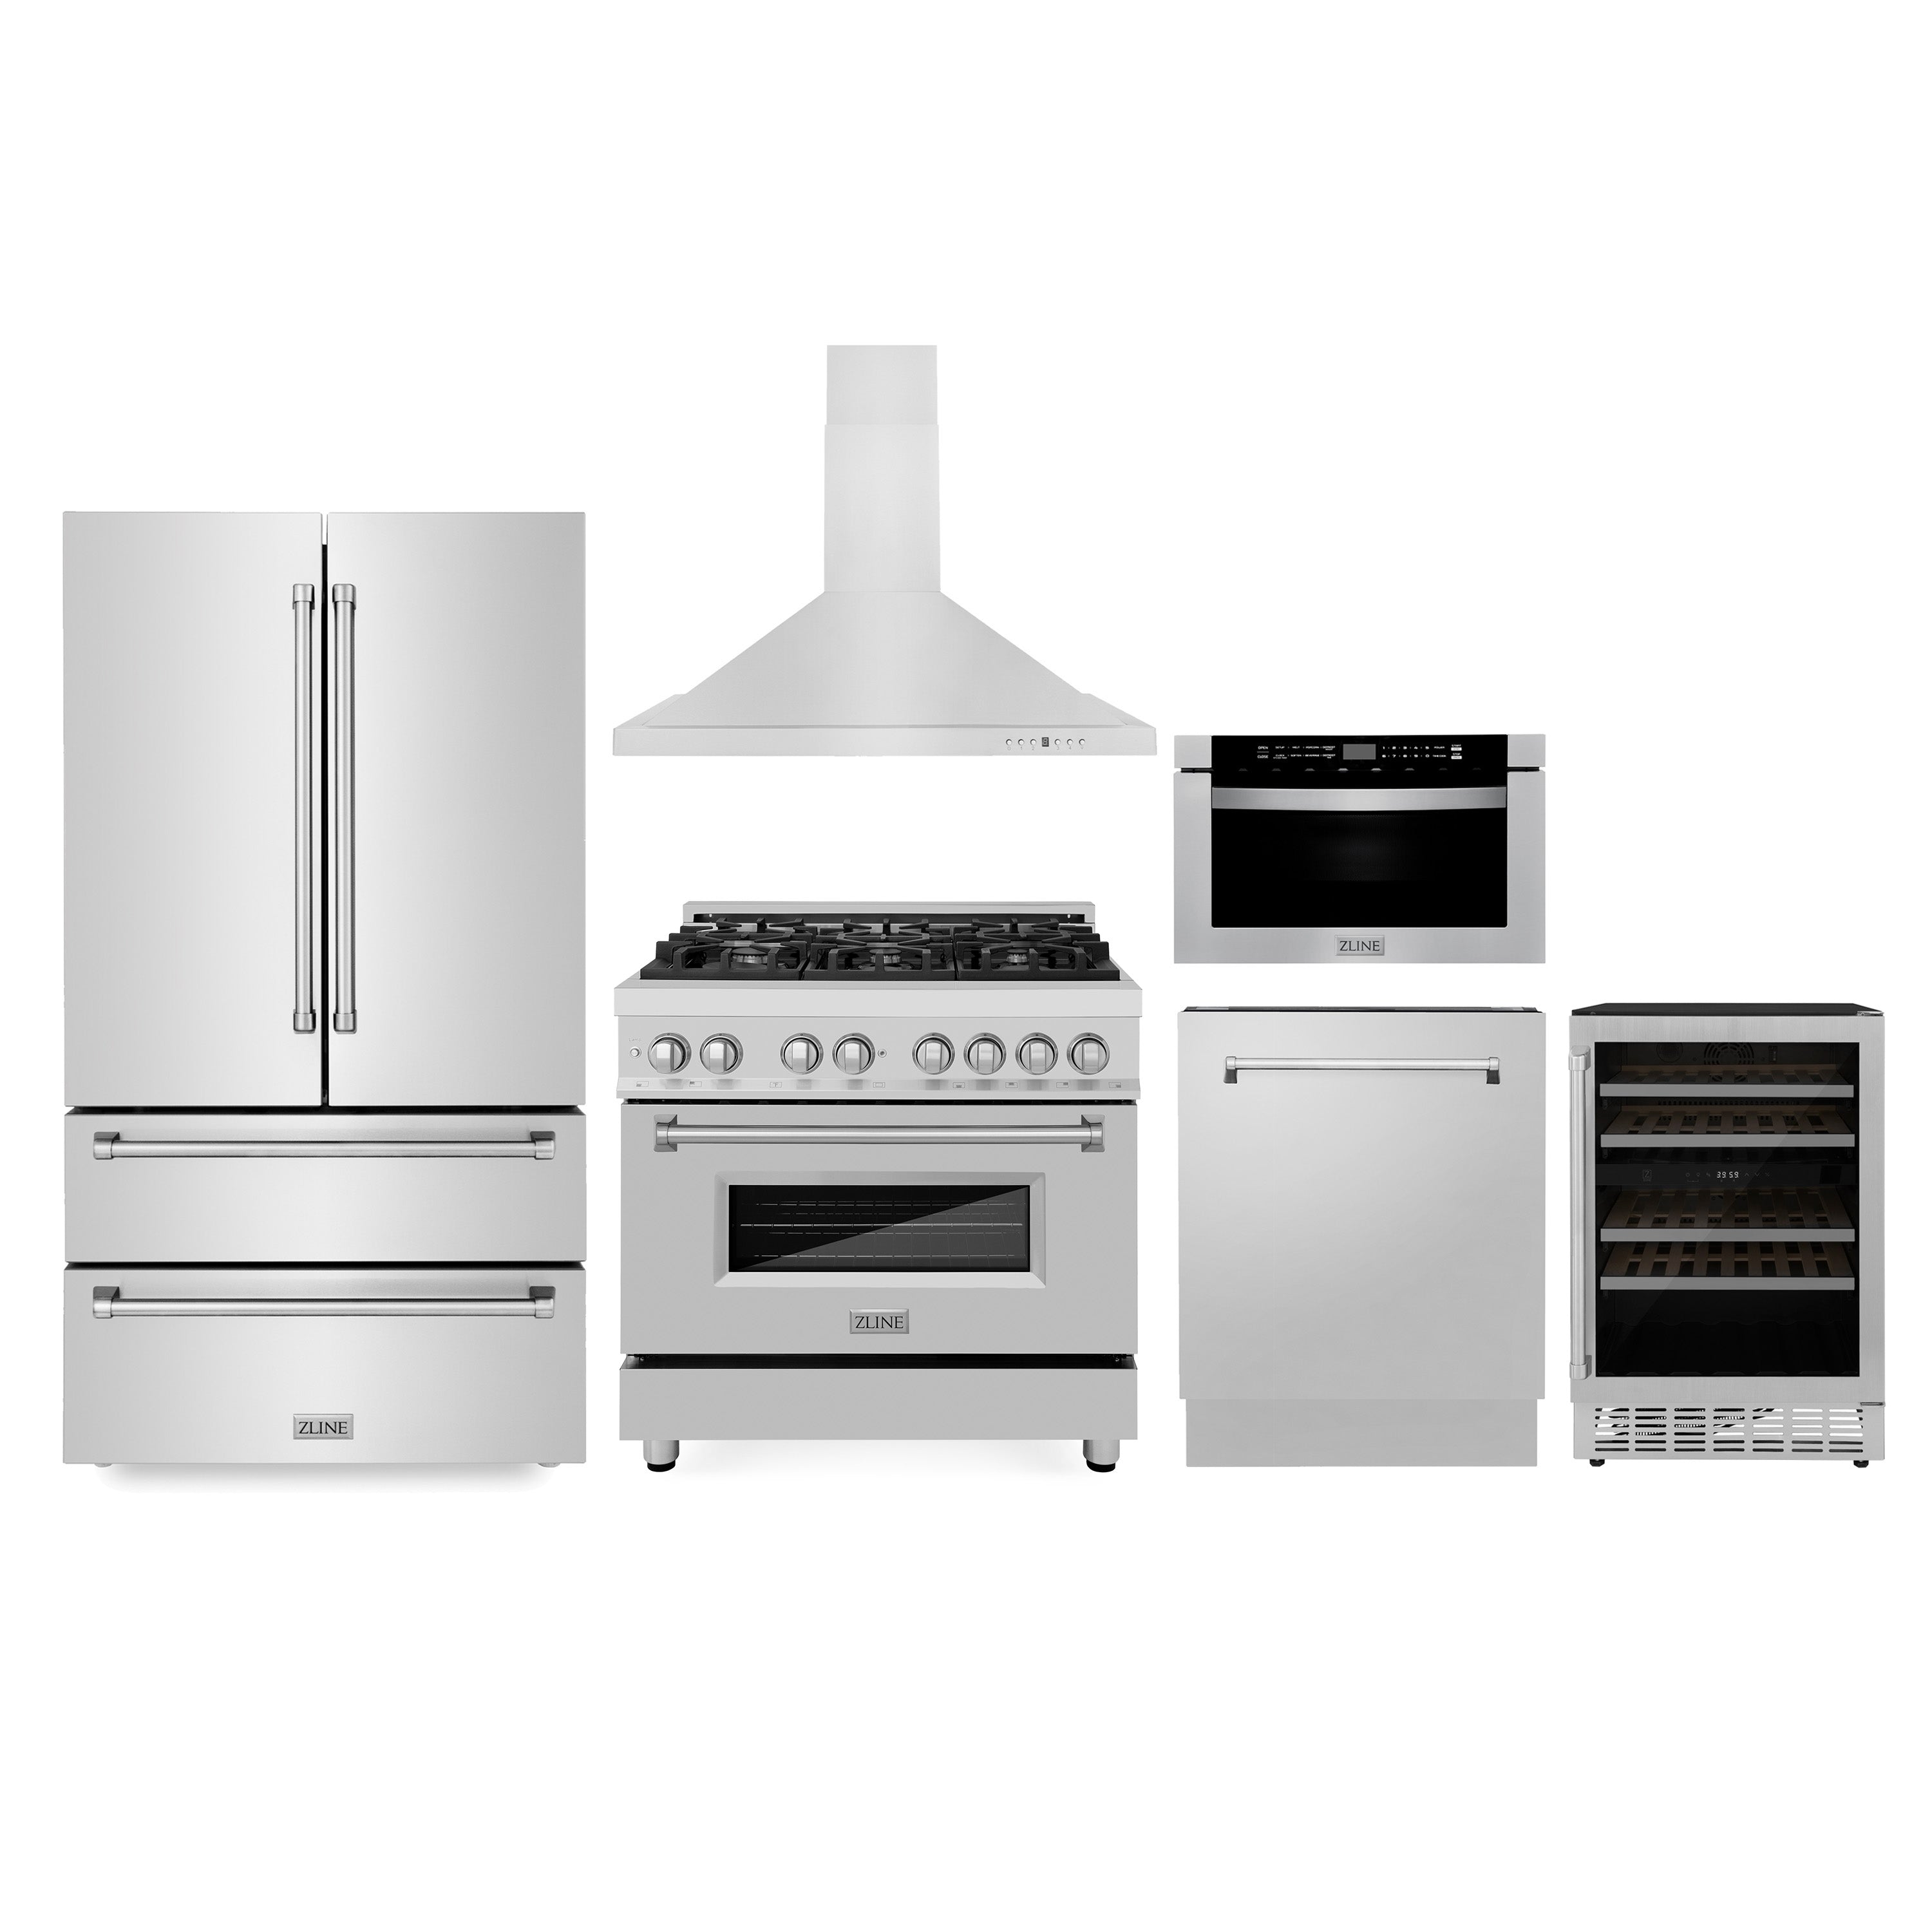 Stainless Steel ZLINE Kitchen Package features a 36 in. French Door Refrigerator, a 36 in. Dual Fuel Range, a 36 in. Range Hood, a 24 in. Microwave Drawer, a 24 in. Tall Tub Dishwasher, and a 24 in. Dual Zone Wine Cooler.